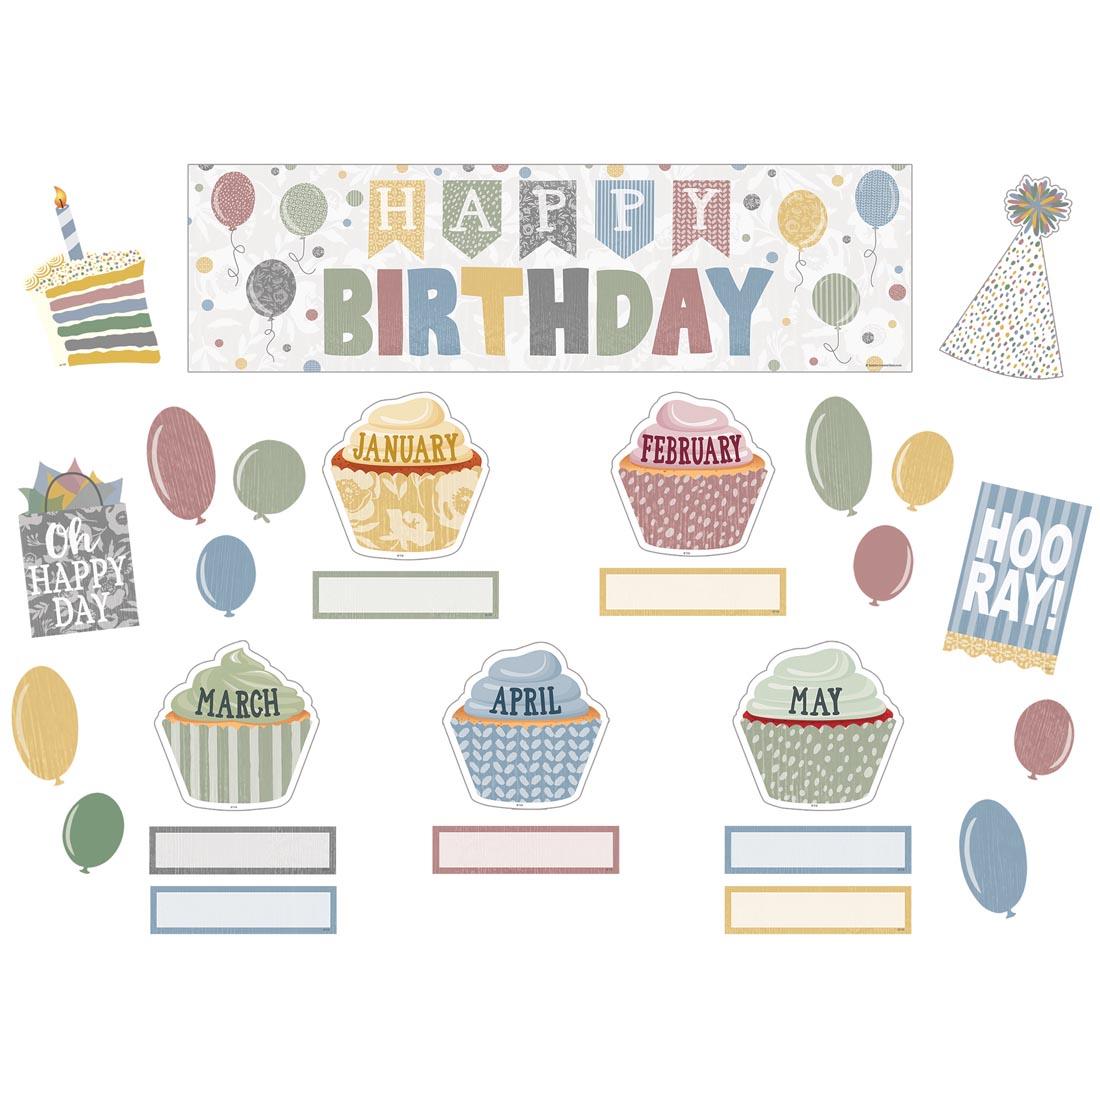 Happy Birthday Mini Bulletin Board Set from the Classroom Cottage collection by Teacher Created Resources